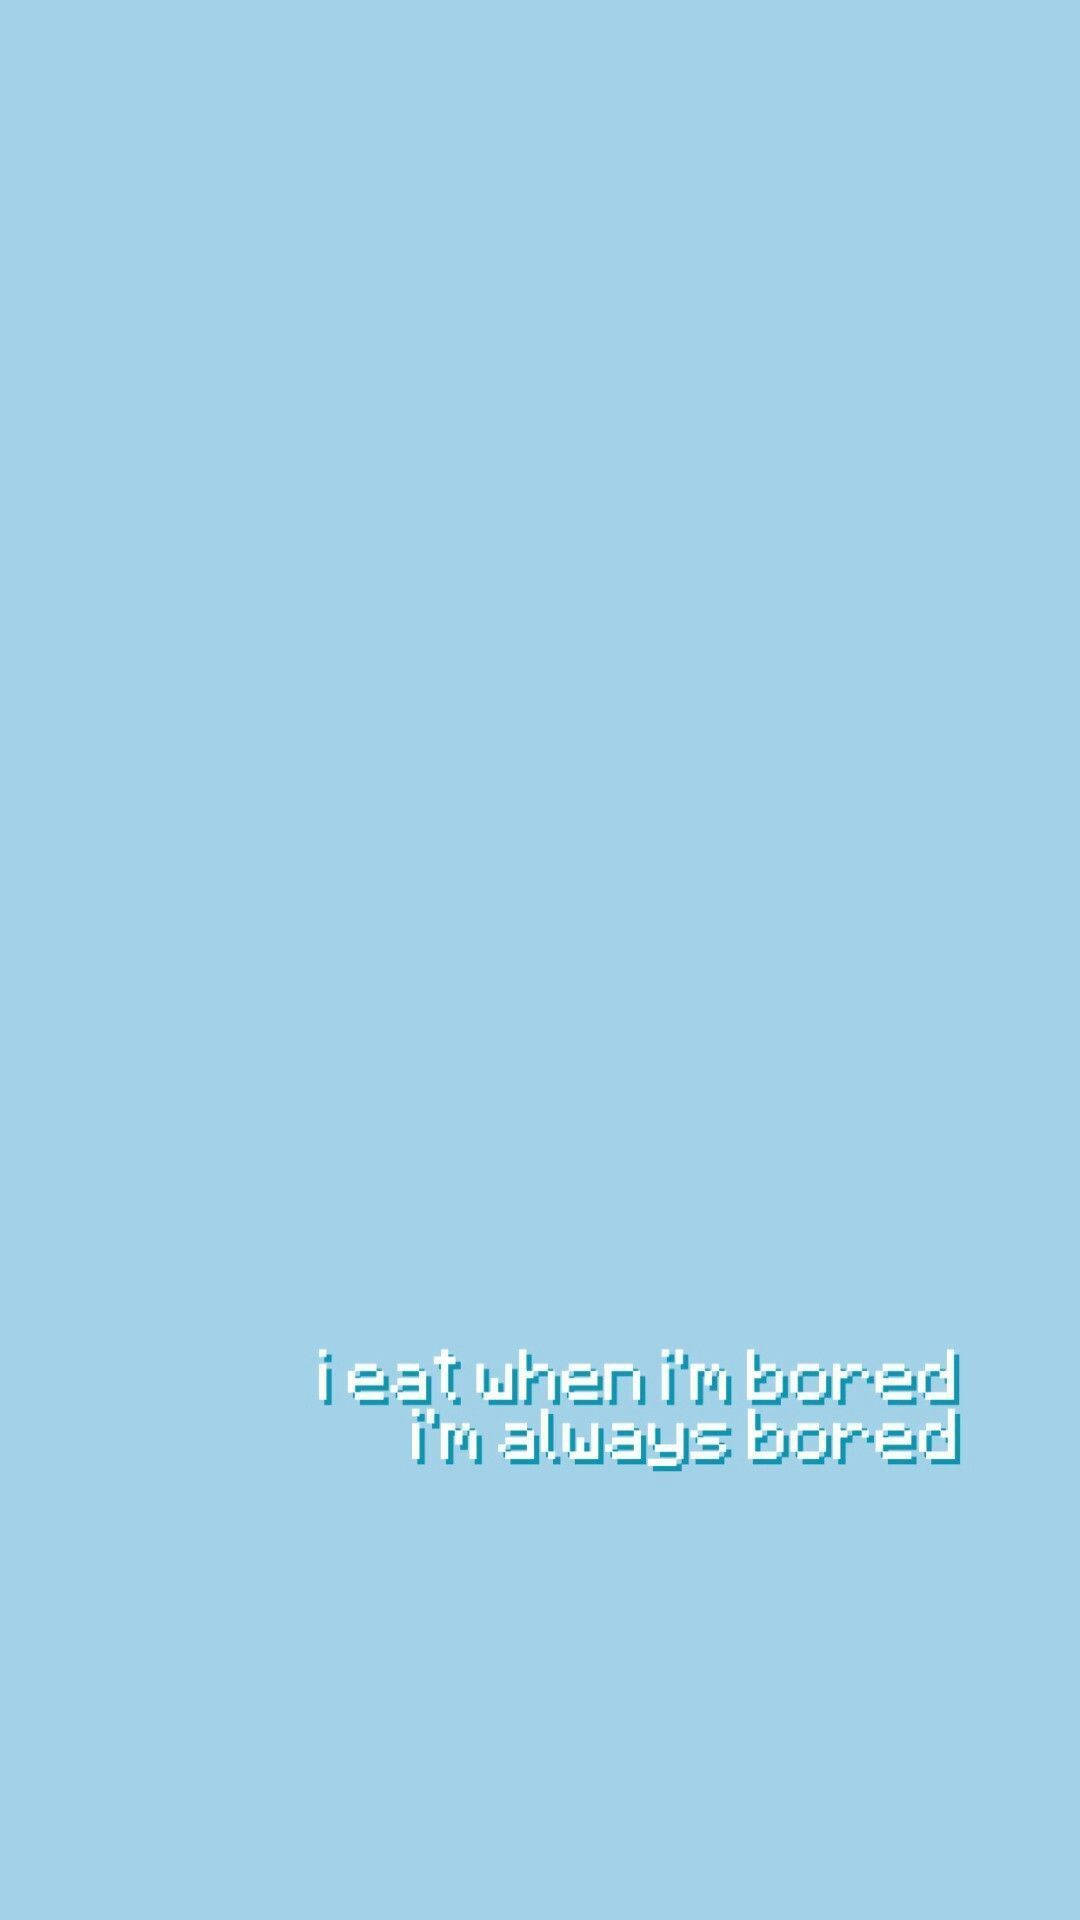 Bored Quote On Baby Blue Backdrop Wallpaper